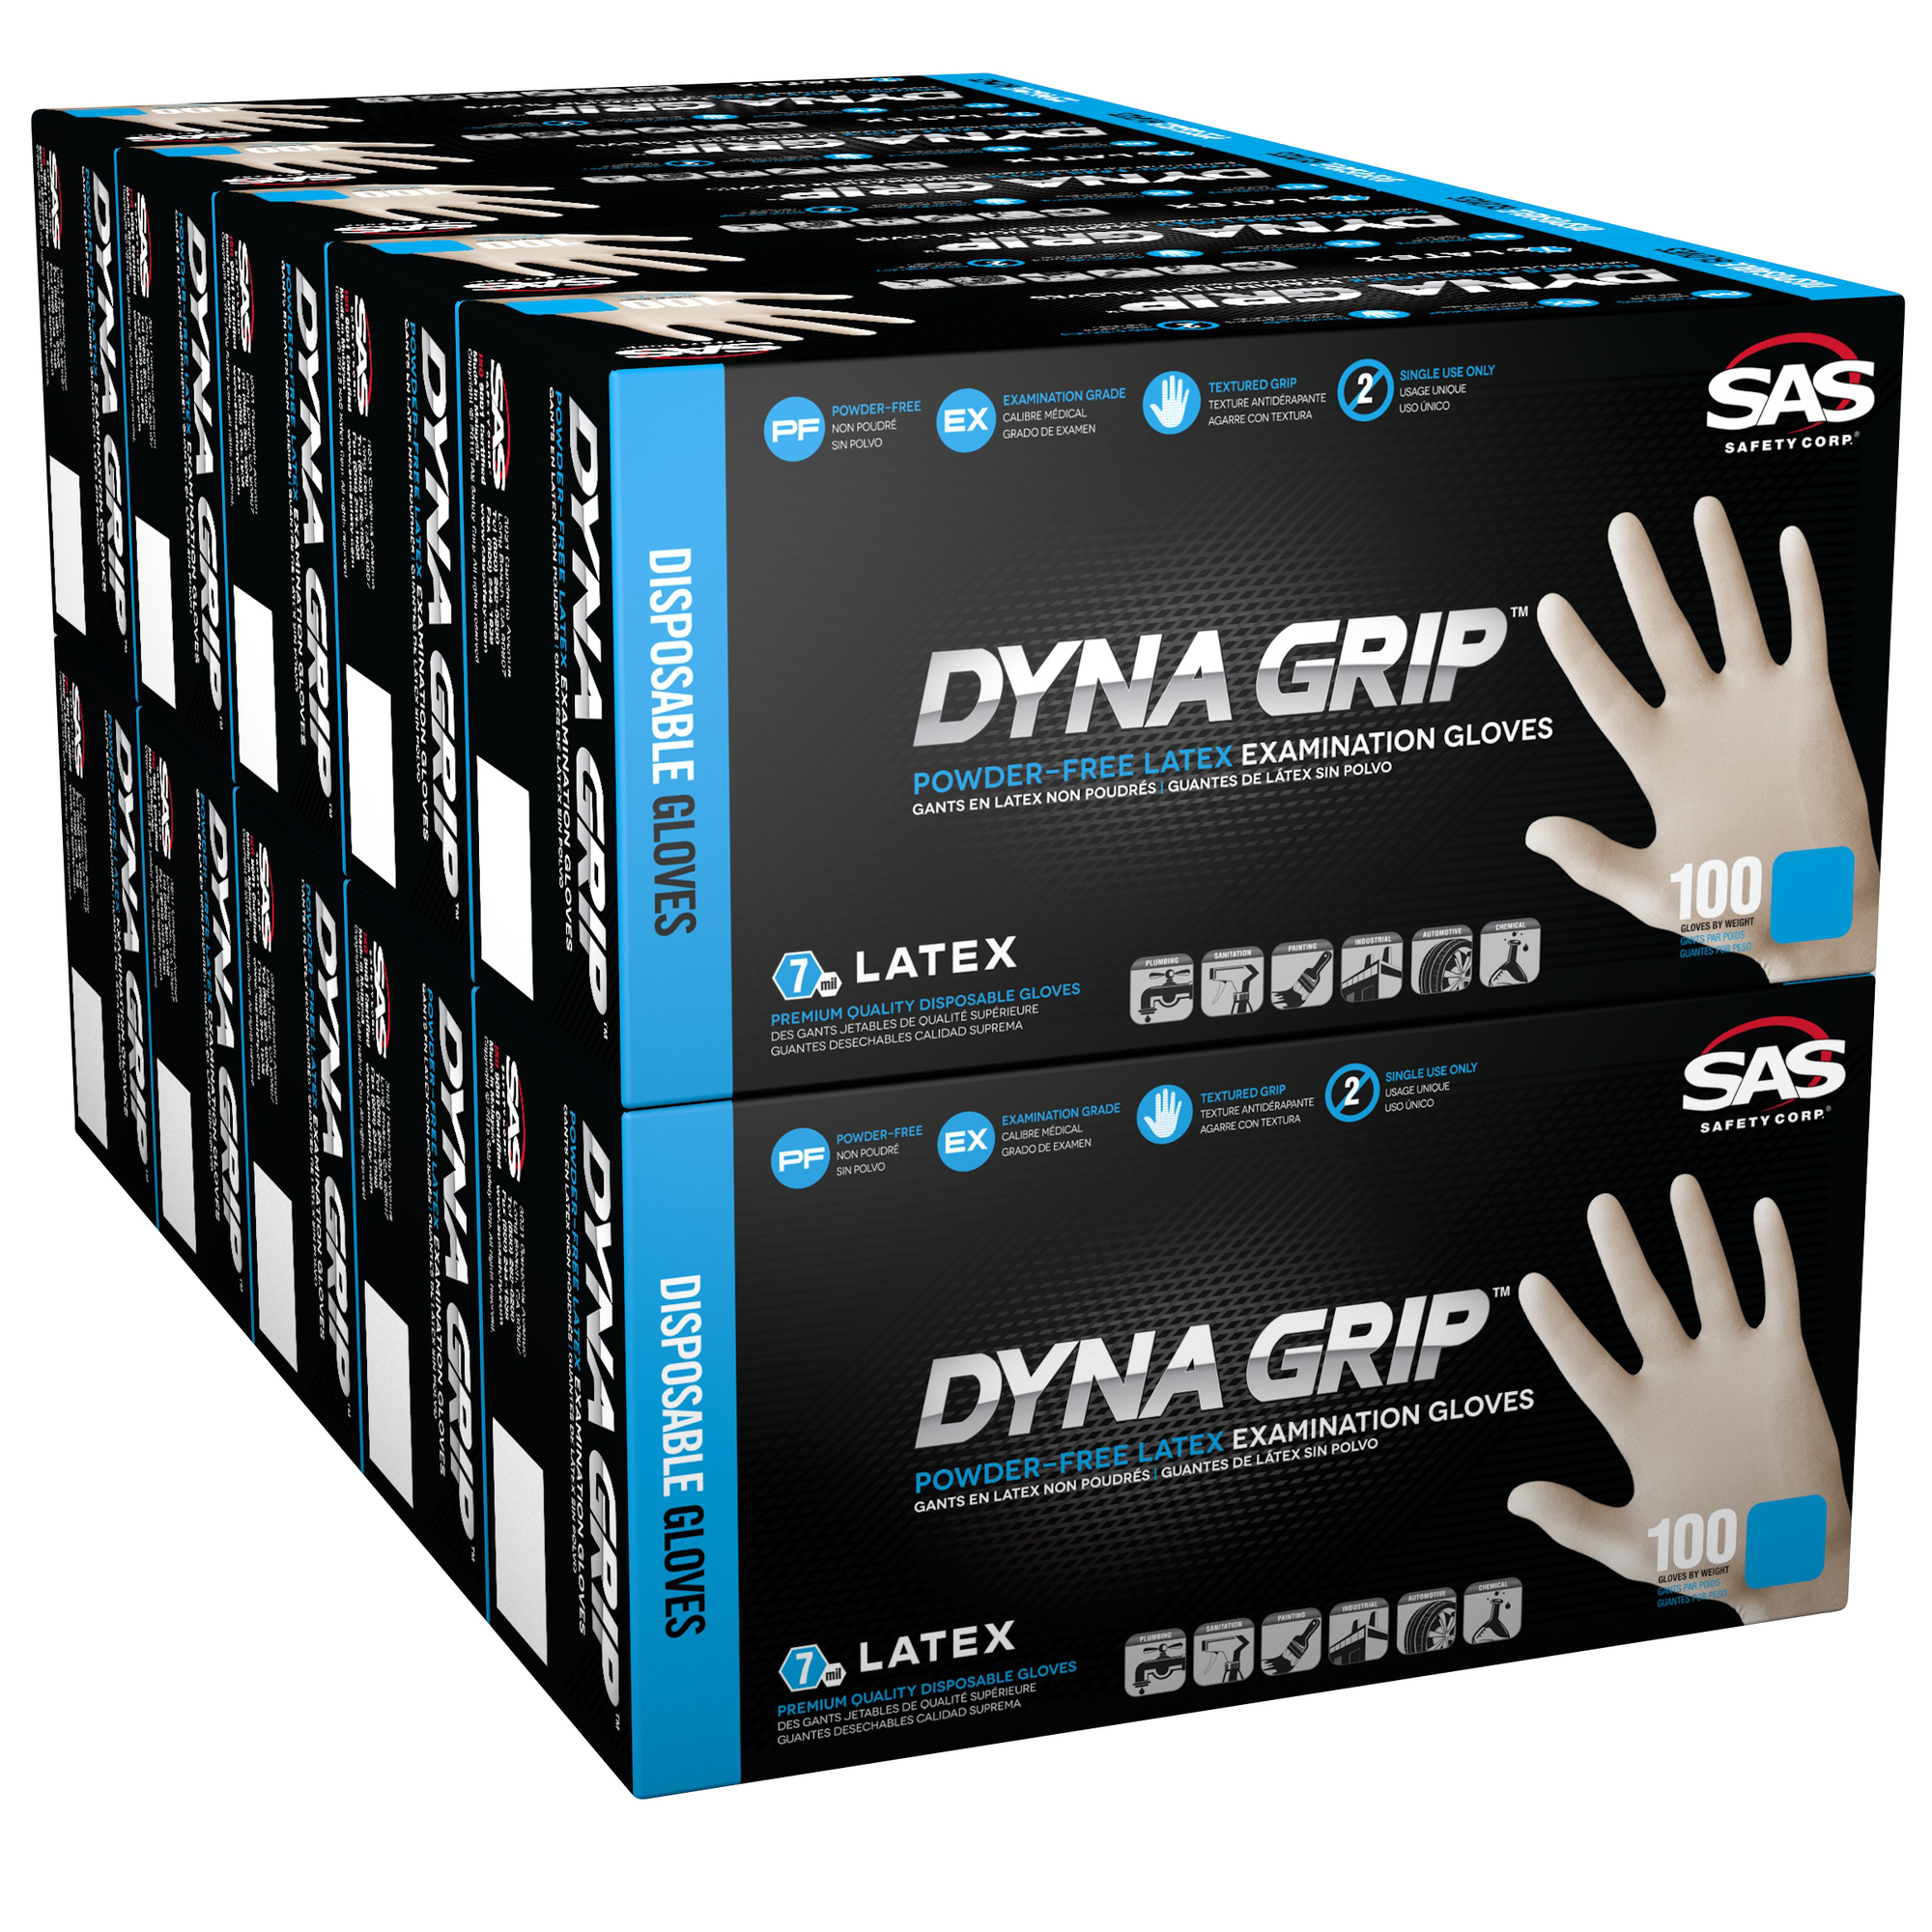 Dyna-Grip, Case of Dyna Grip PF Exam Latex 7 mil 1000 Glove, Size XL, Color White, Included (qty.) 1000 Model 650-1004CASE